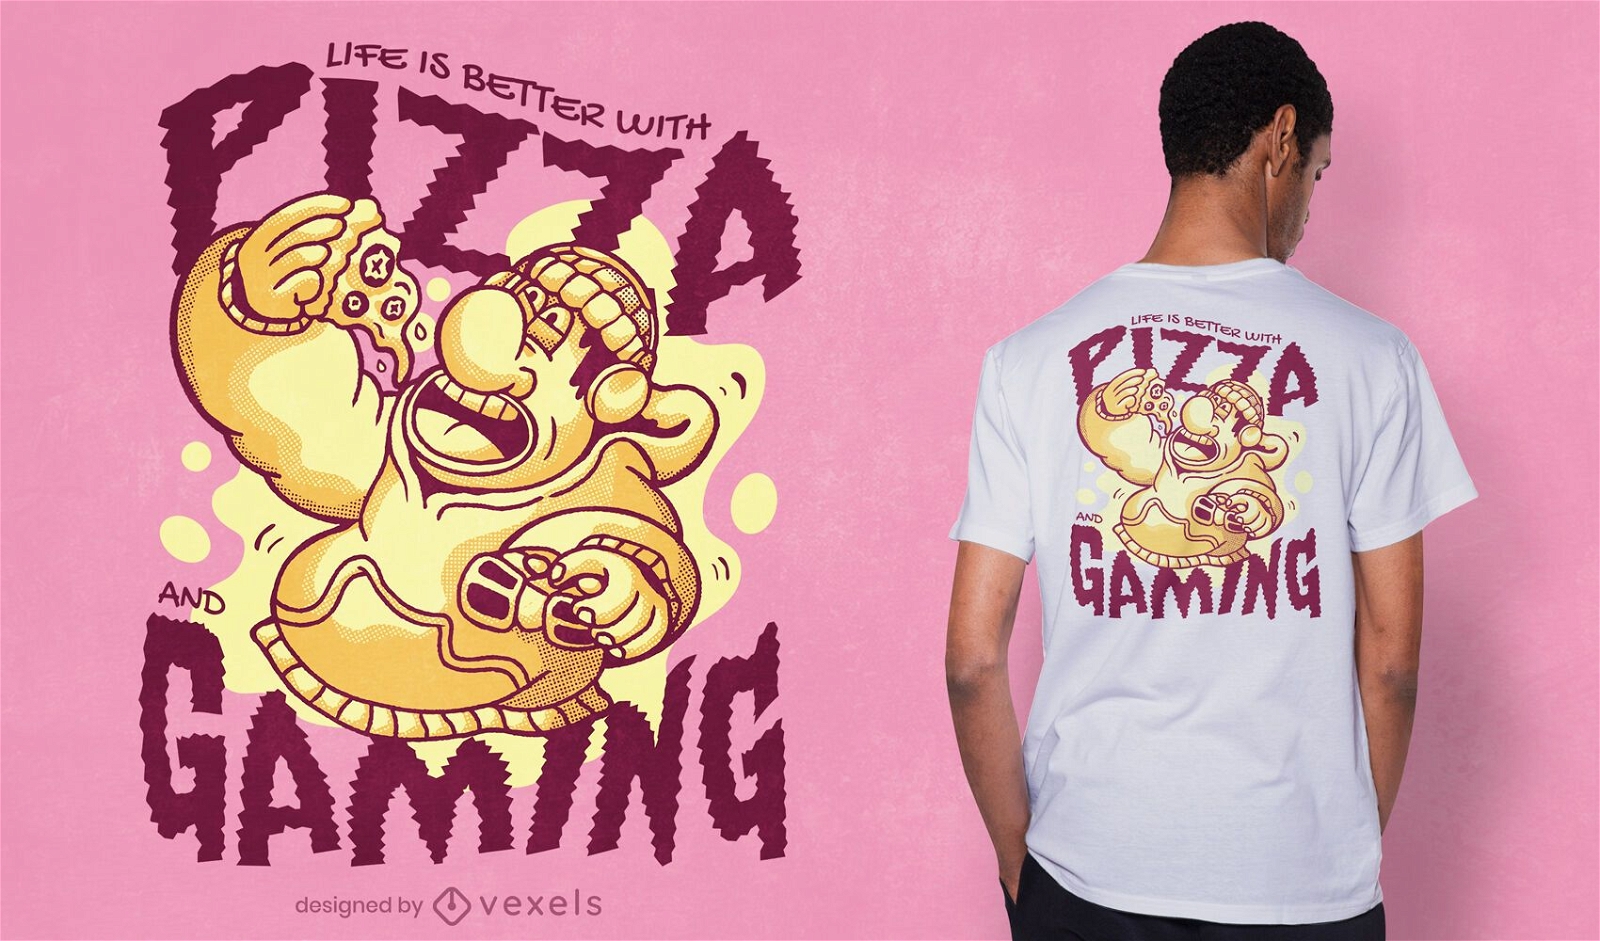 Pizza and gaming t-shirt design